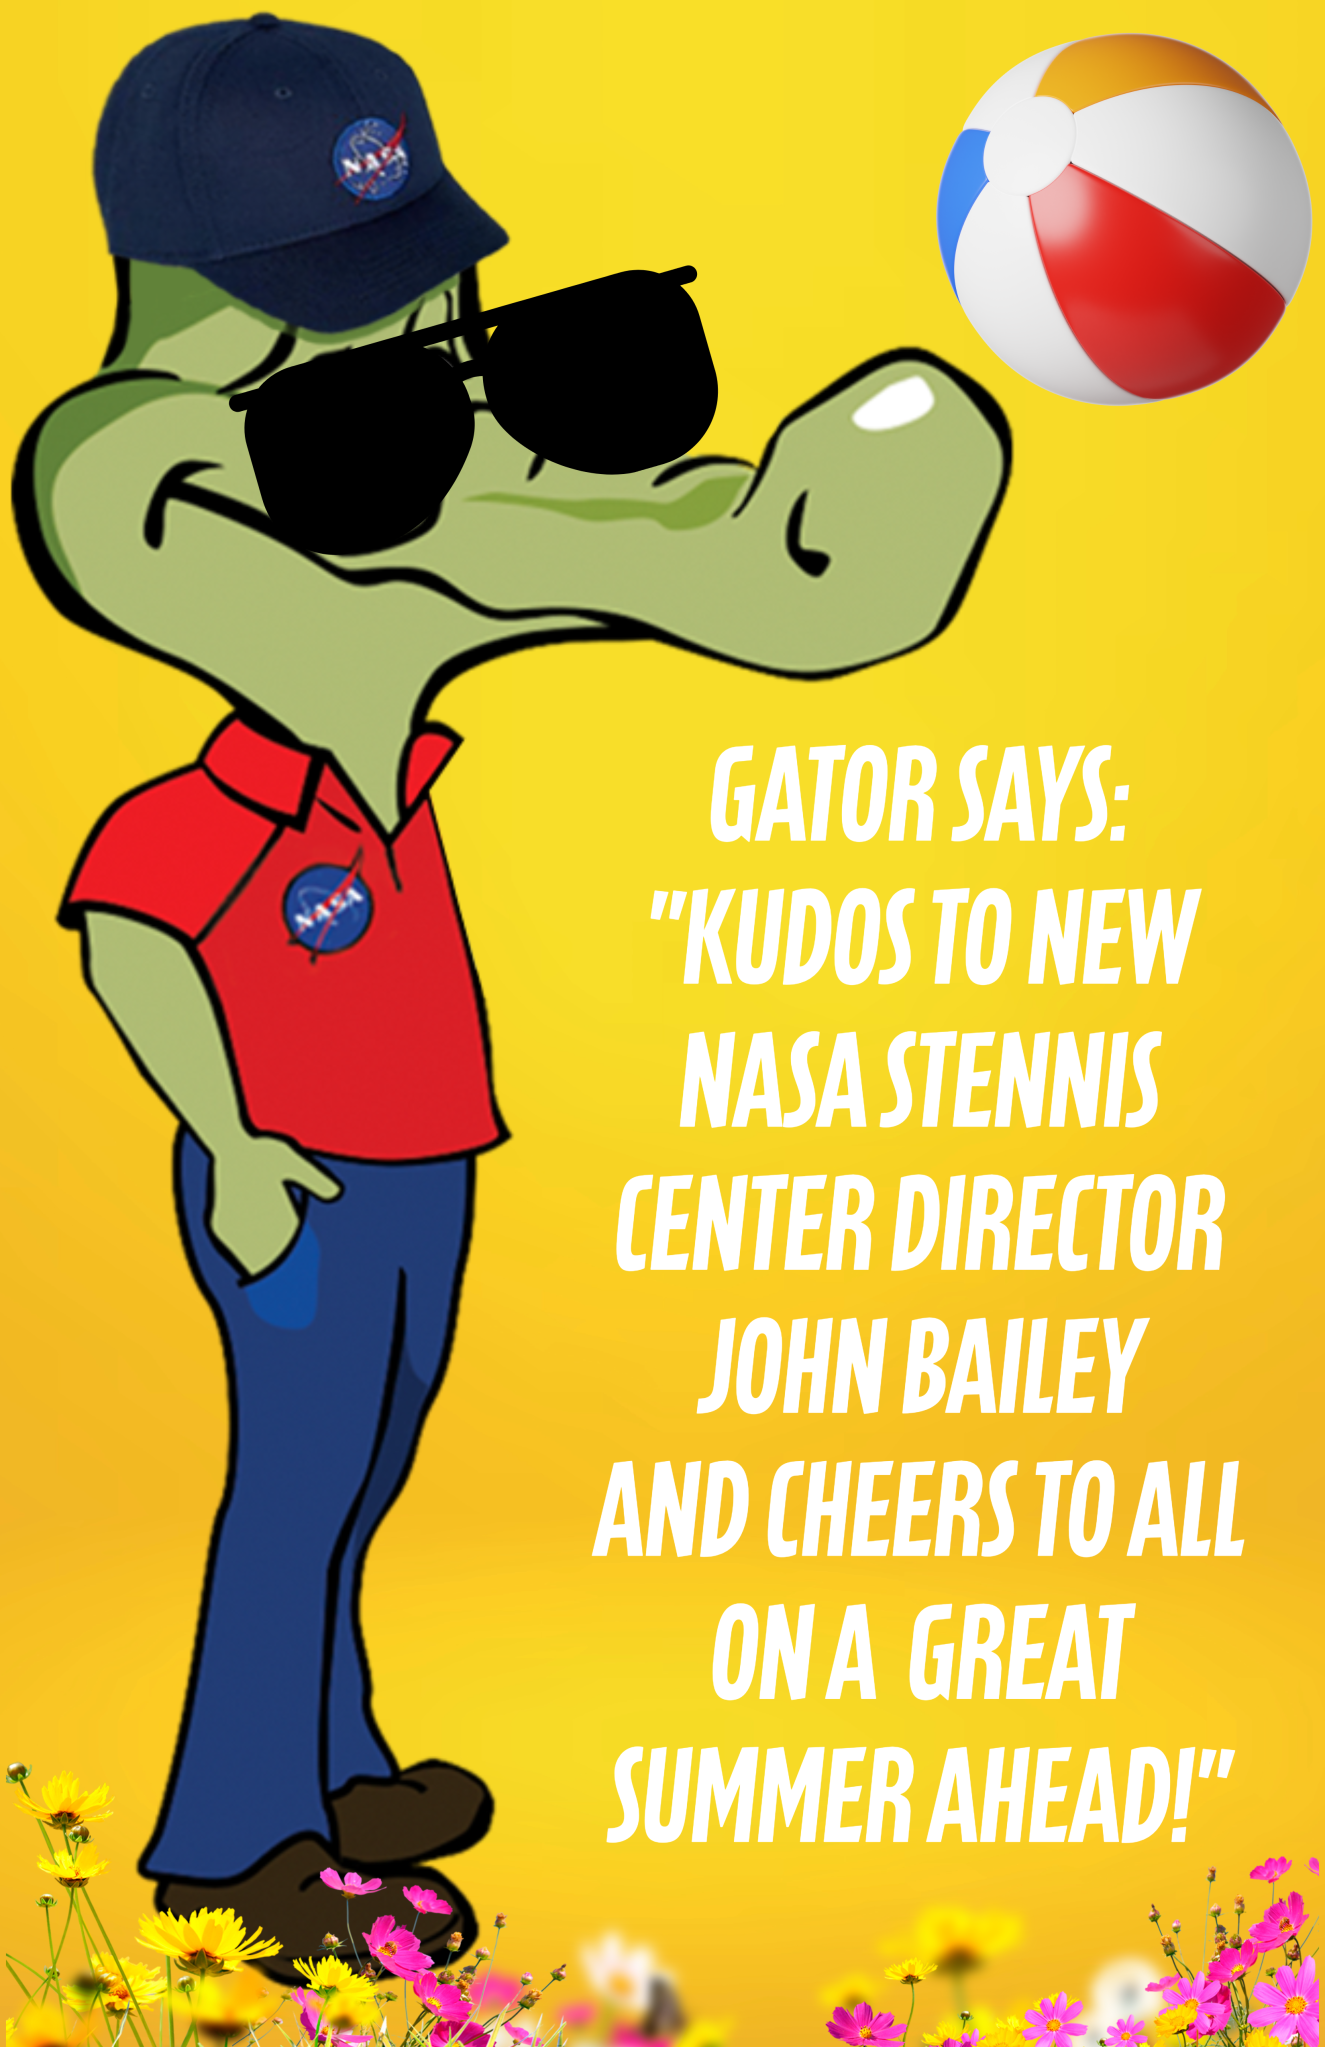 This illustration of Gator incudes a quote of the fictional character sending kudos to the new NASA Stennis Center Director John Bailey